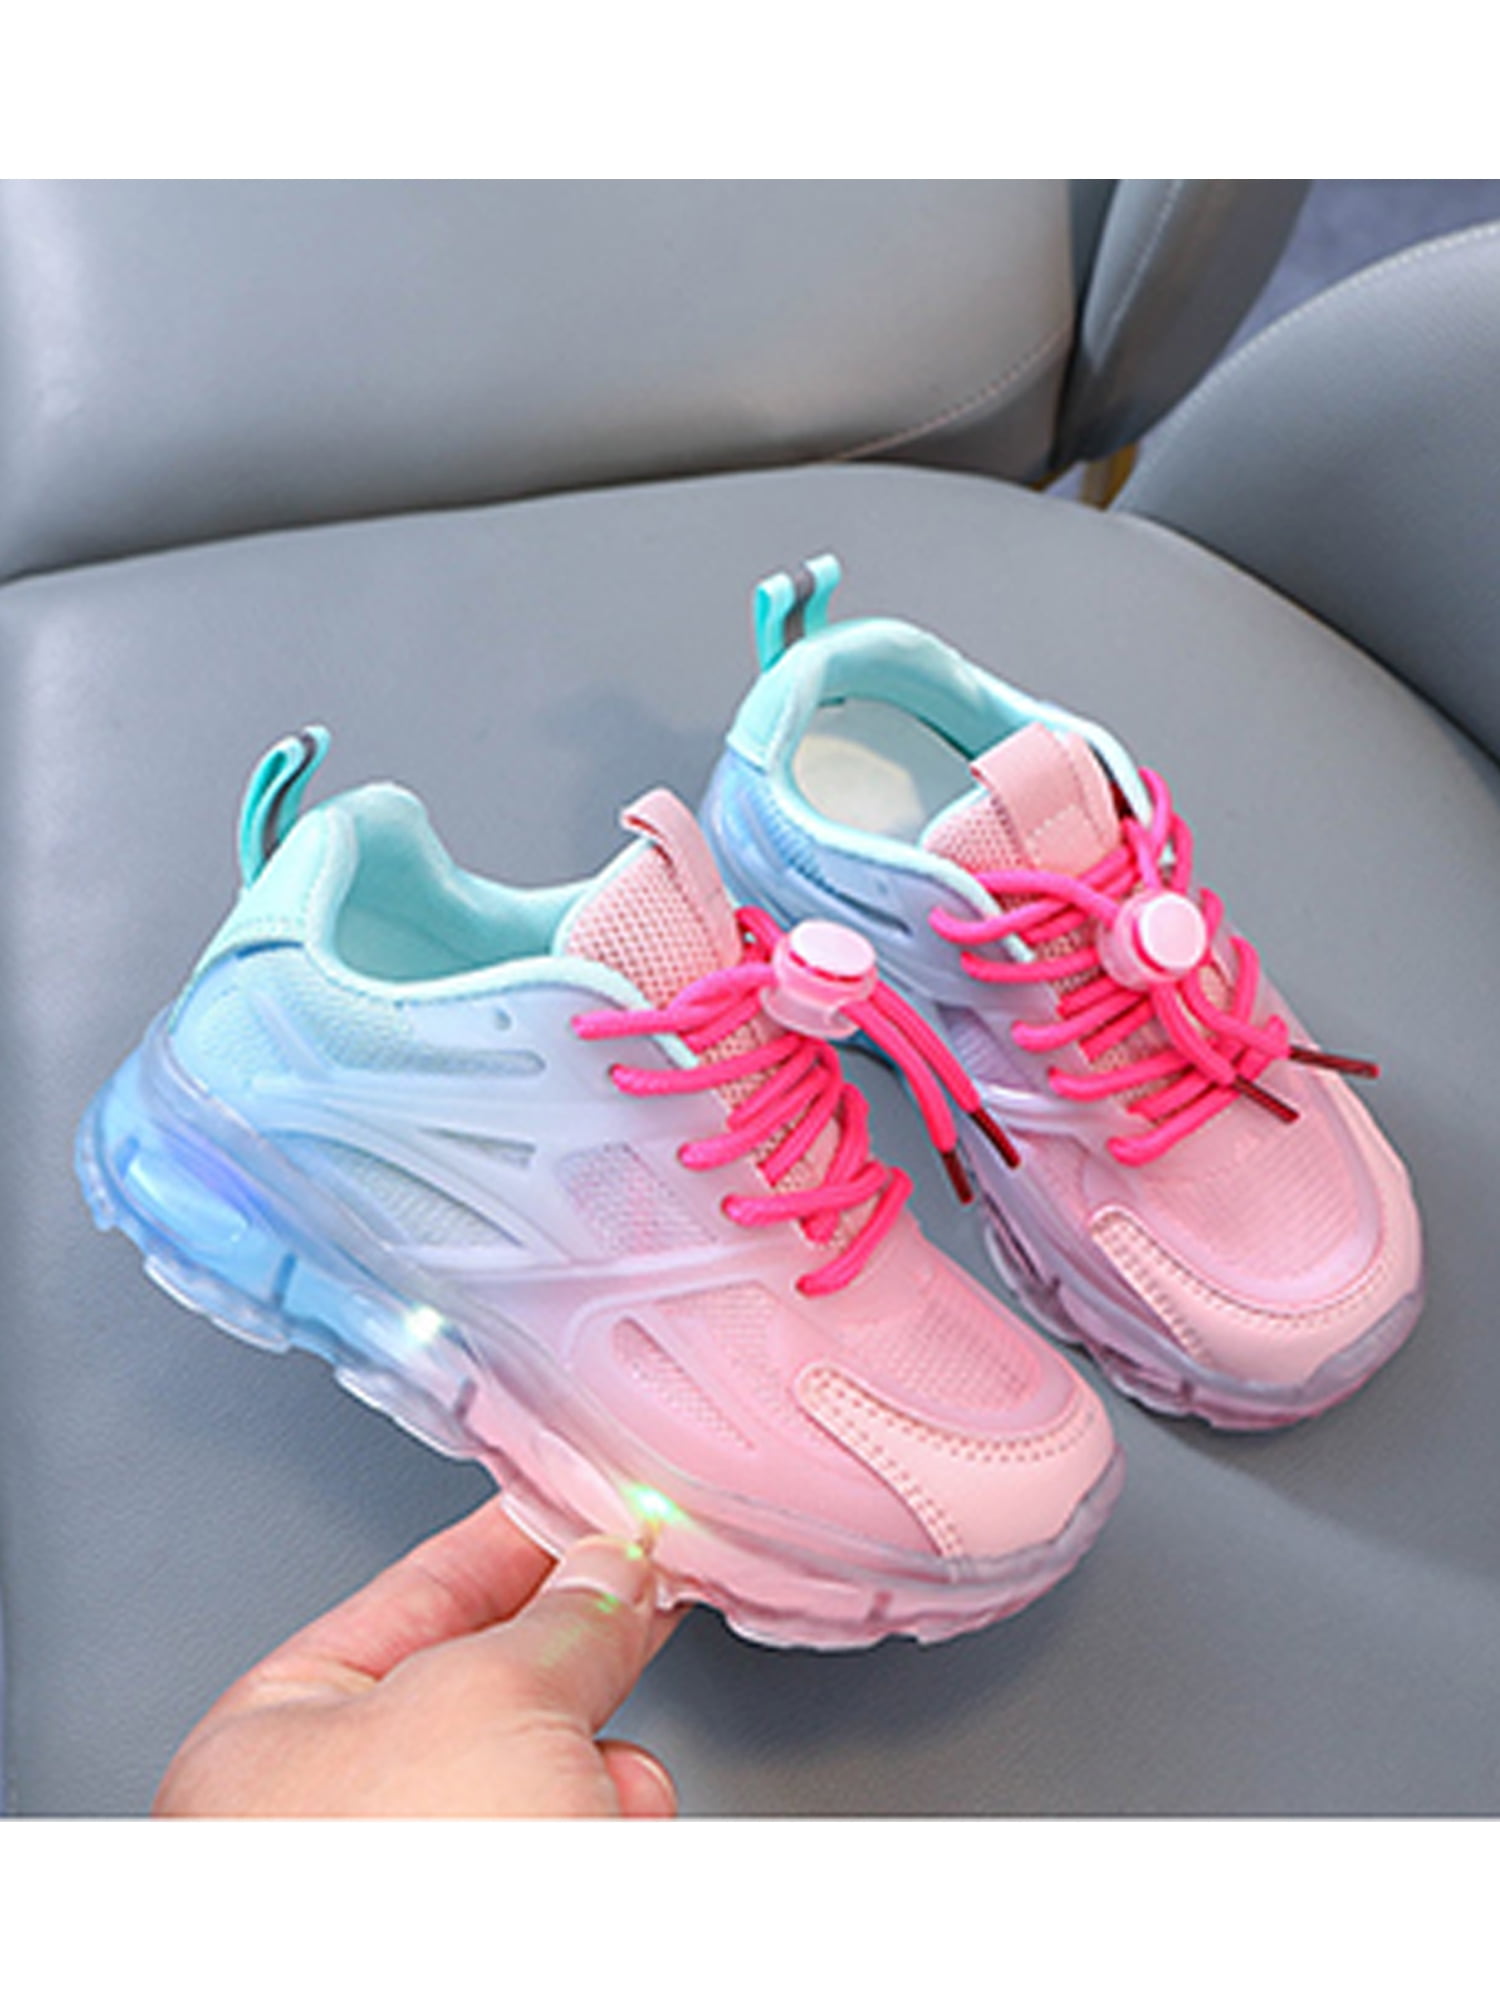 SIMANLAN Fashion Pink Trainers Breathable Sneakers Shoe Children Sport Kids 13C Girls Athletic Shoes Boys Comfort Running